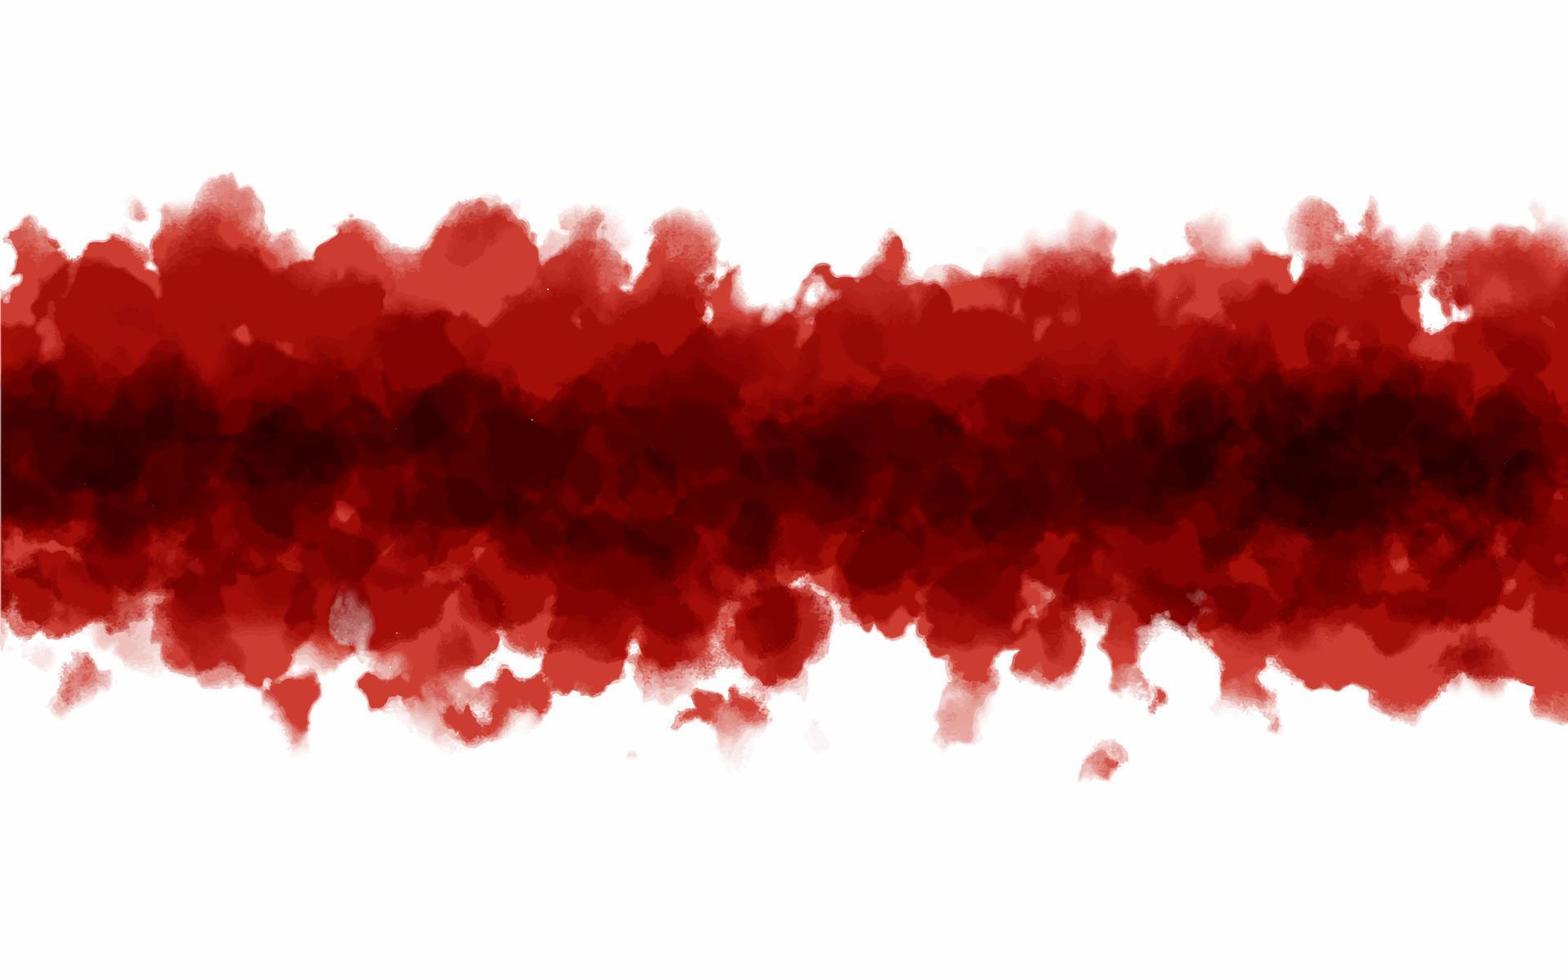 Abstract magenta, red and pink watercolor background.Paint splatter vector